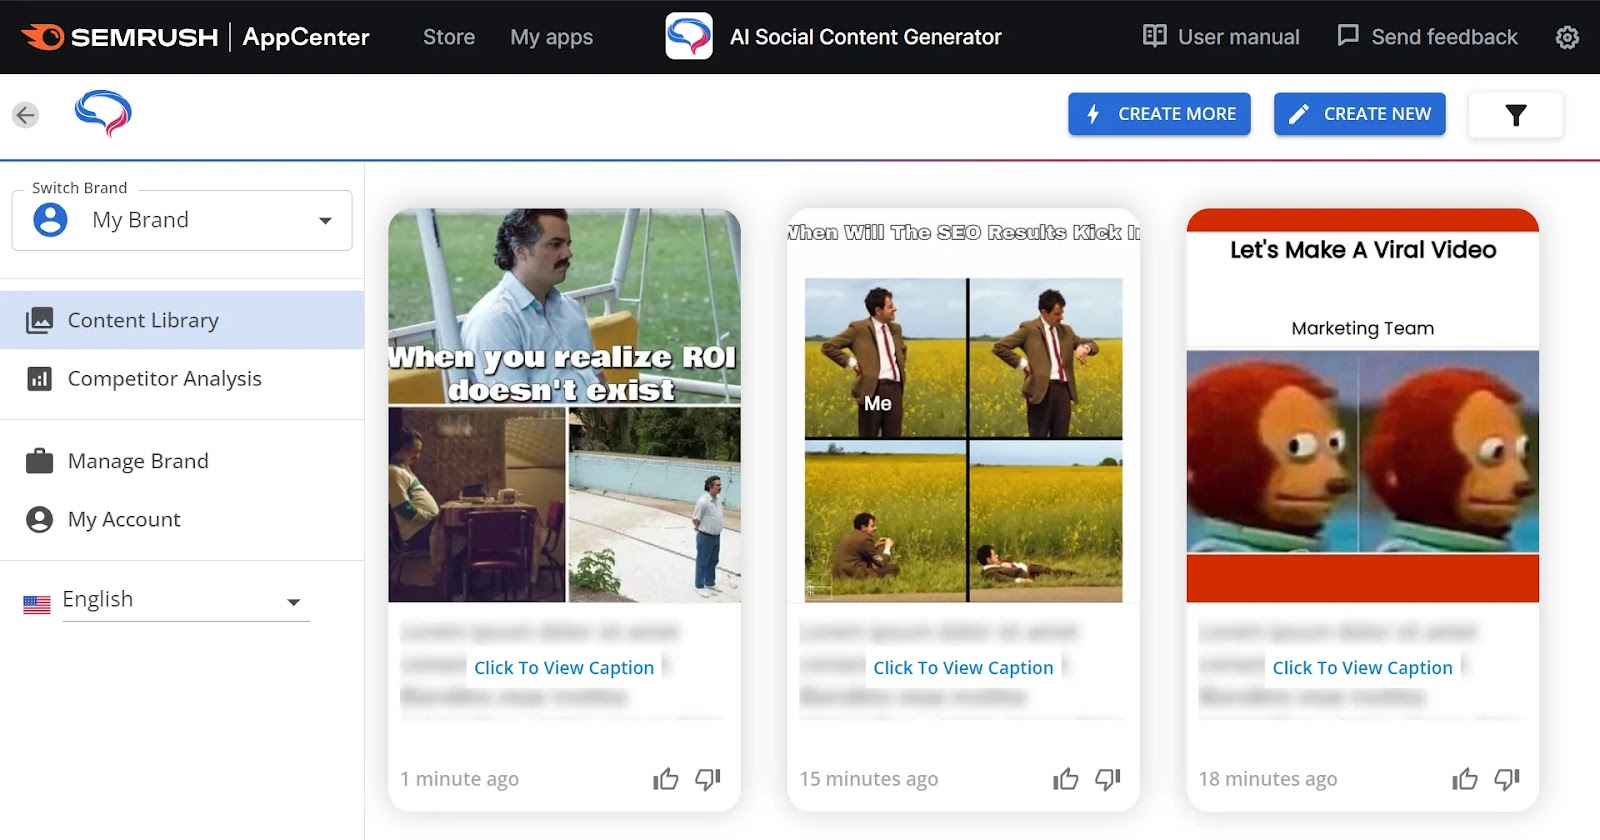 Content library section in AI Social Content Generator